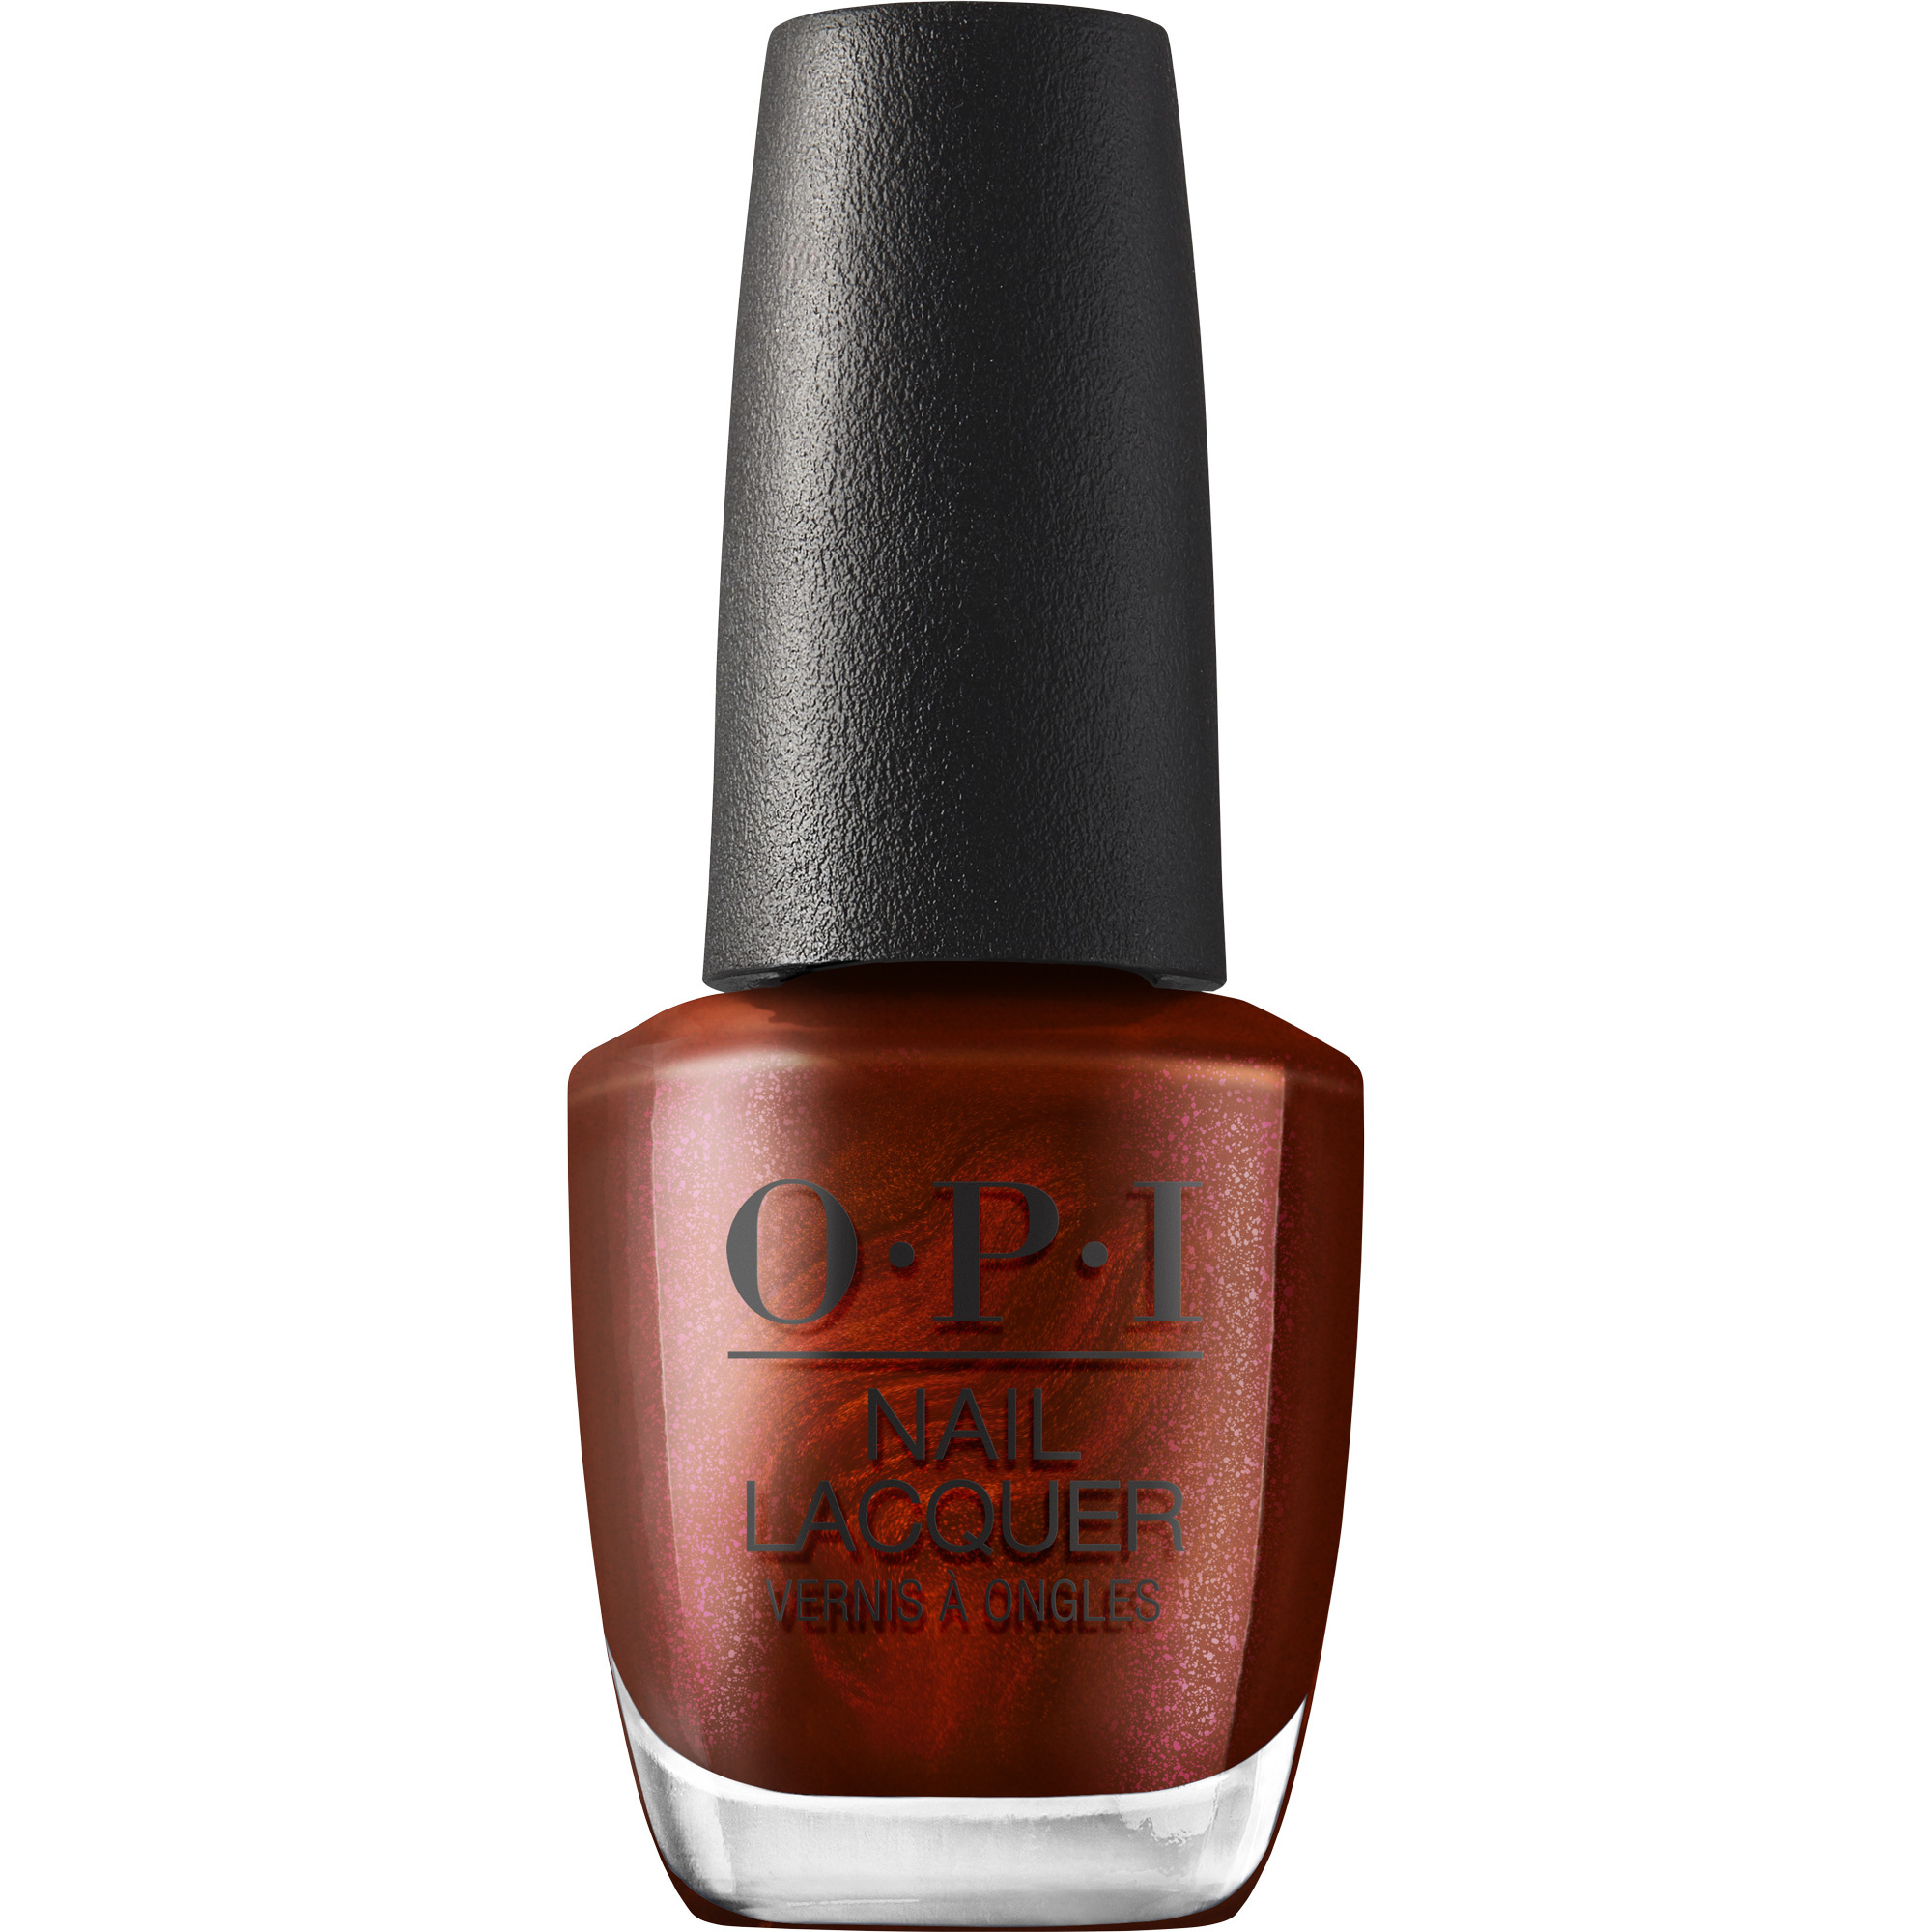 OPI Jewel Be Bold: Bring out the Big Gems 0.5oz